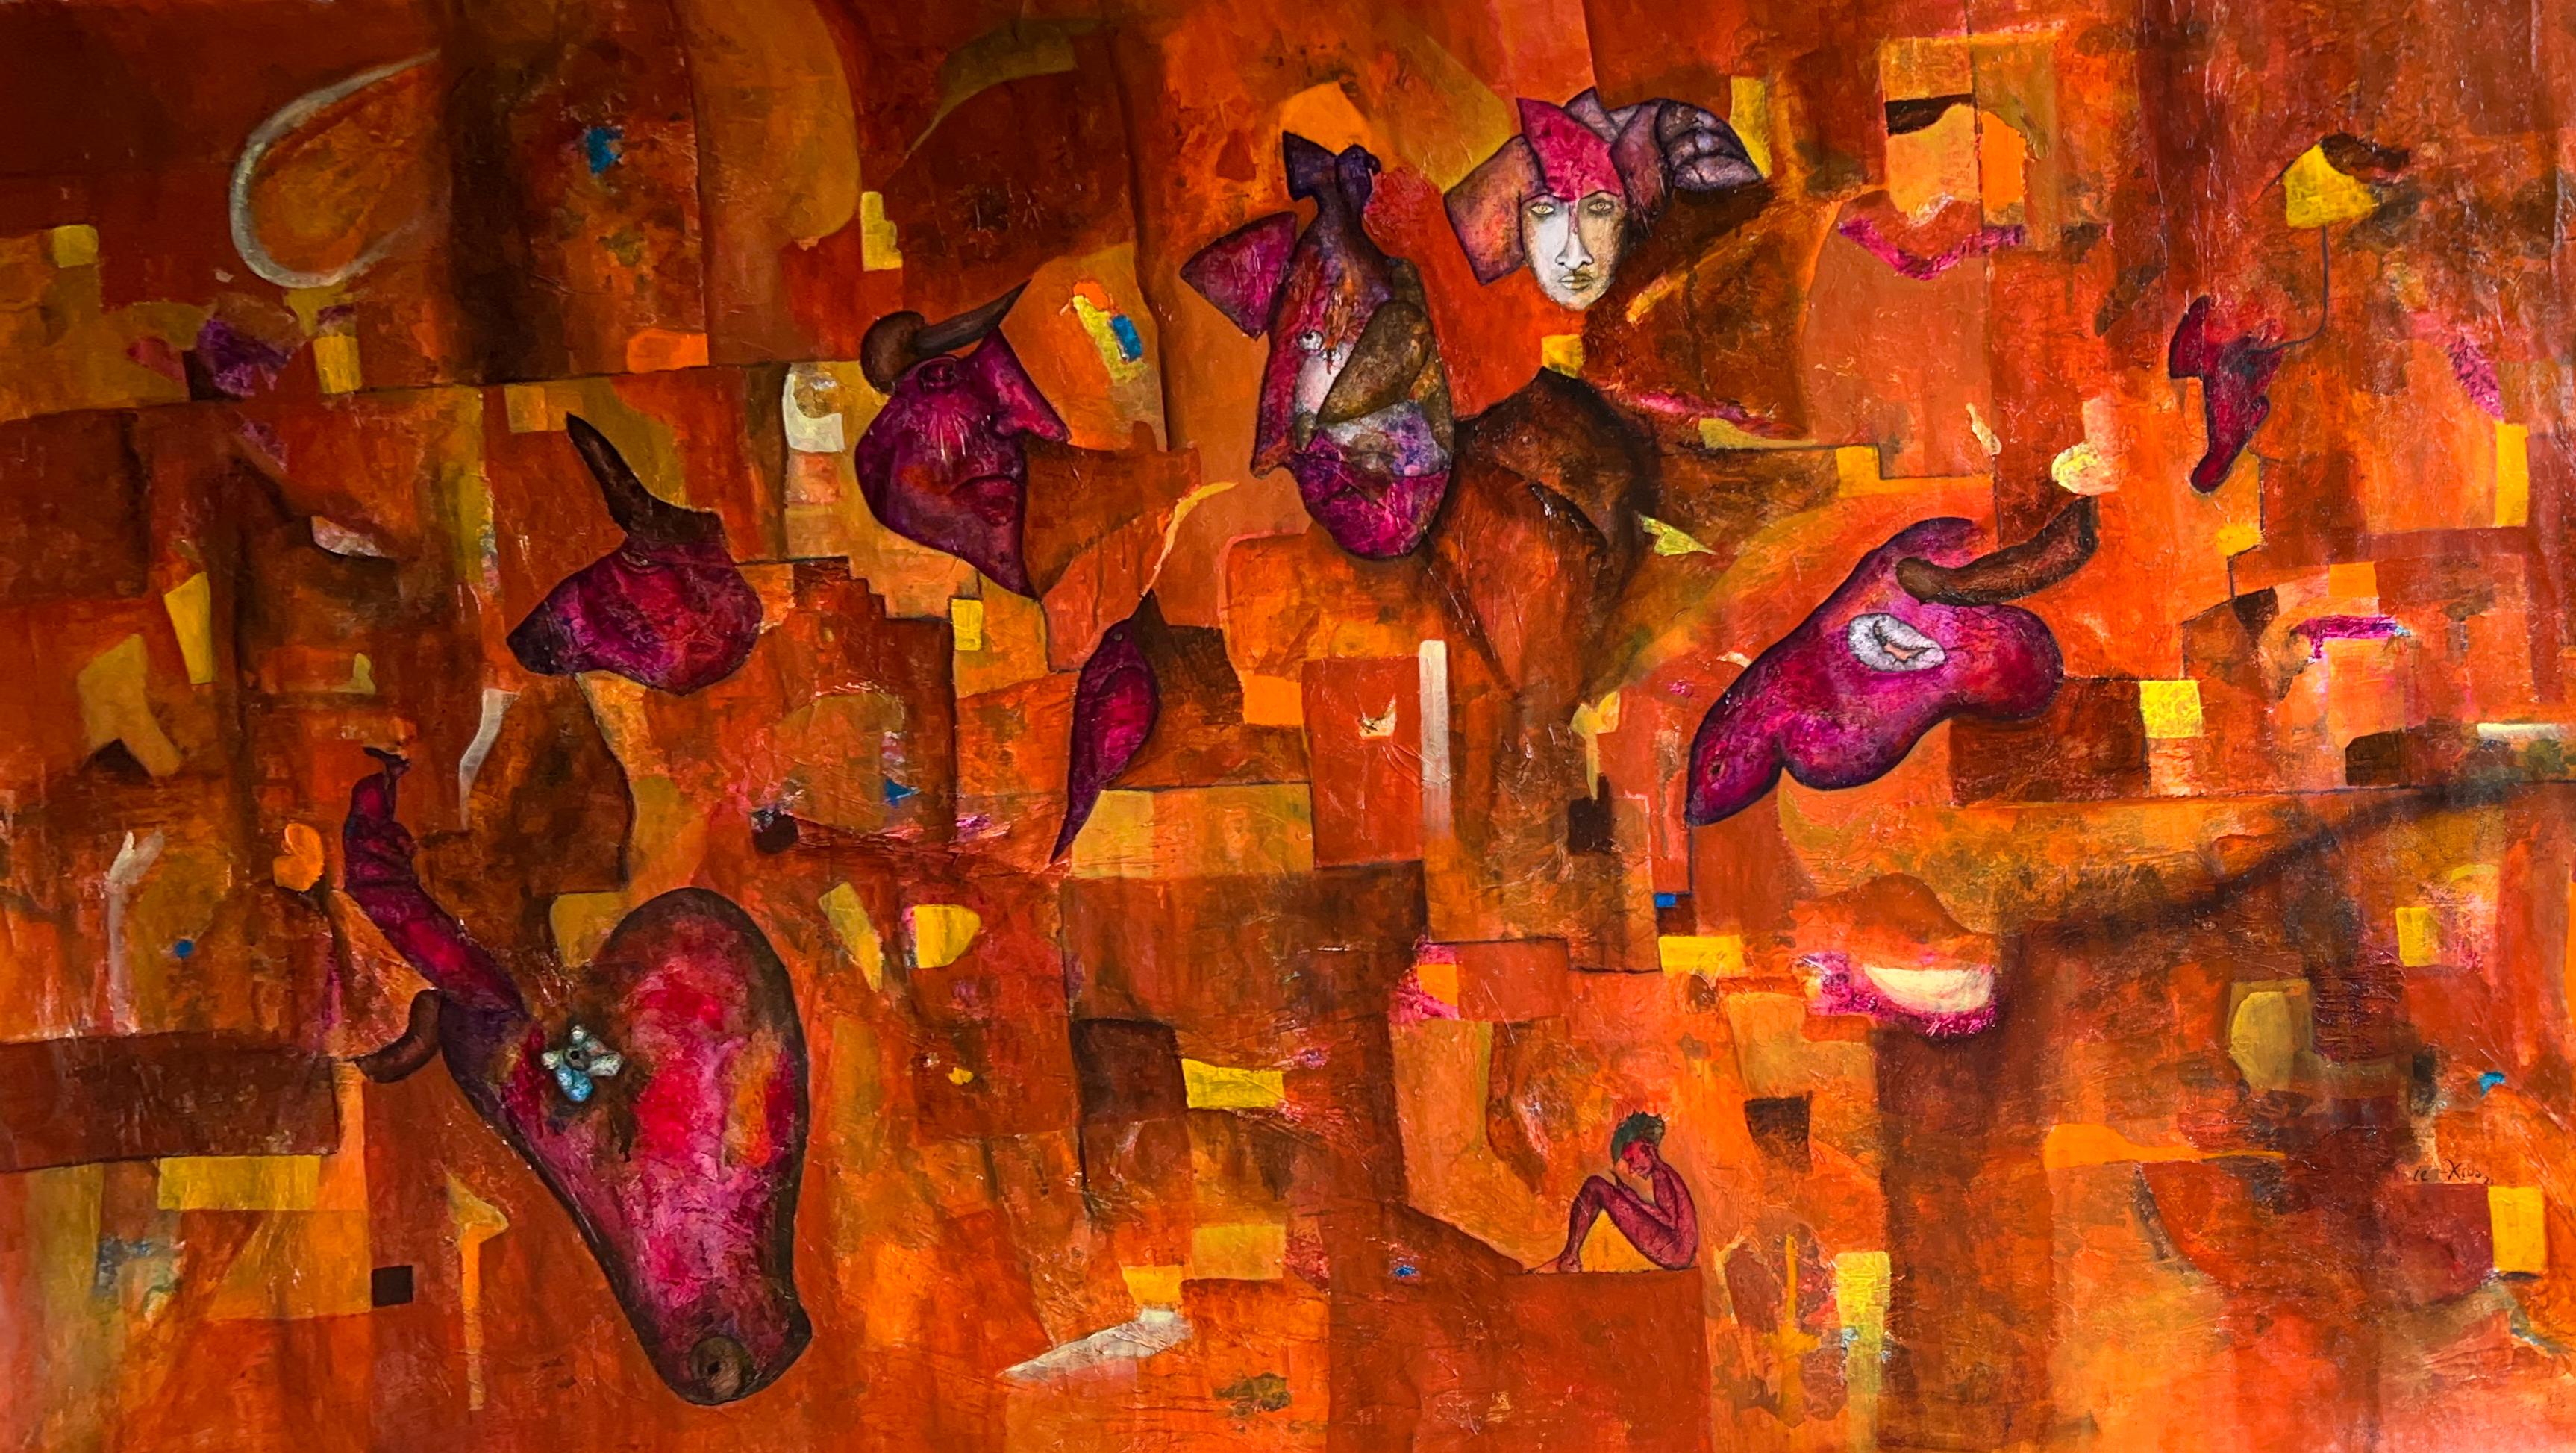 Luis Alexander Rodríguez (Ie-Xiua) Abstract Painting - "Encounters" Figures and Animals in Abstract Space: Art by L-Xiua